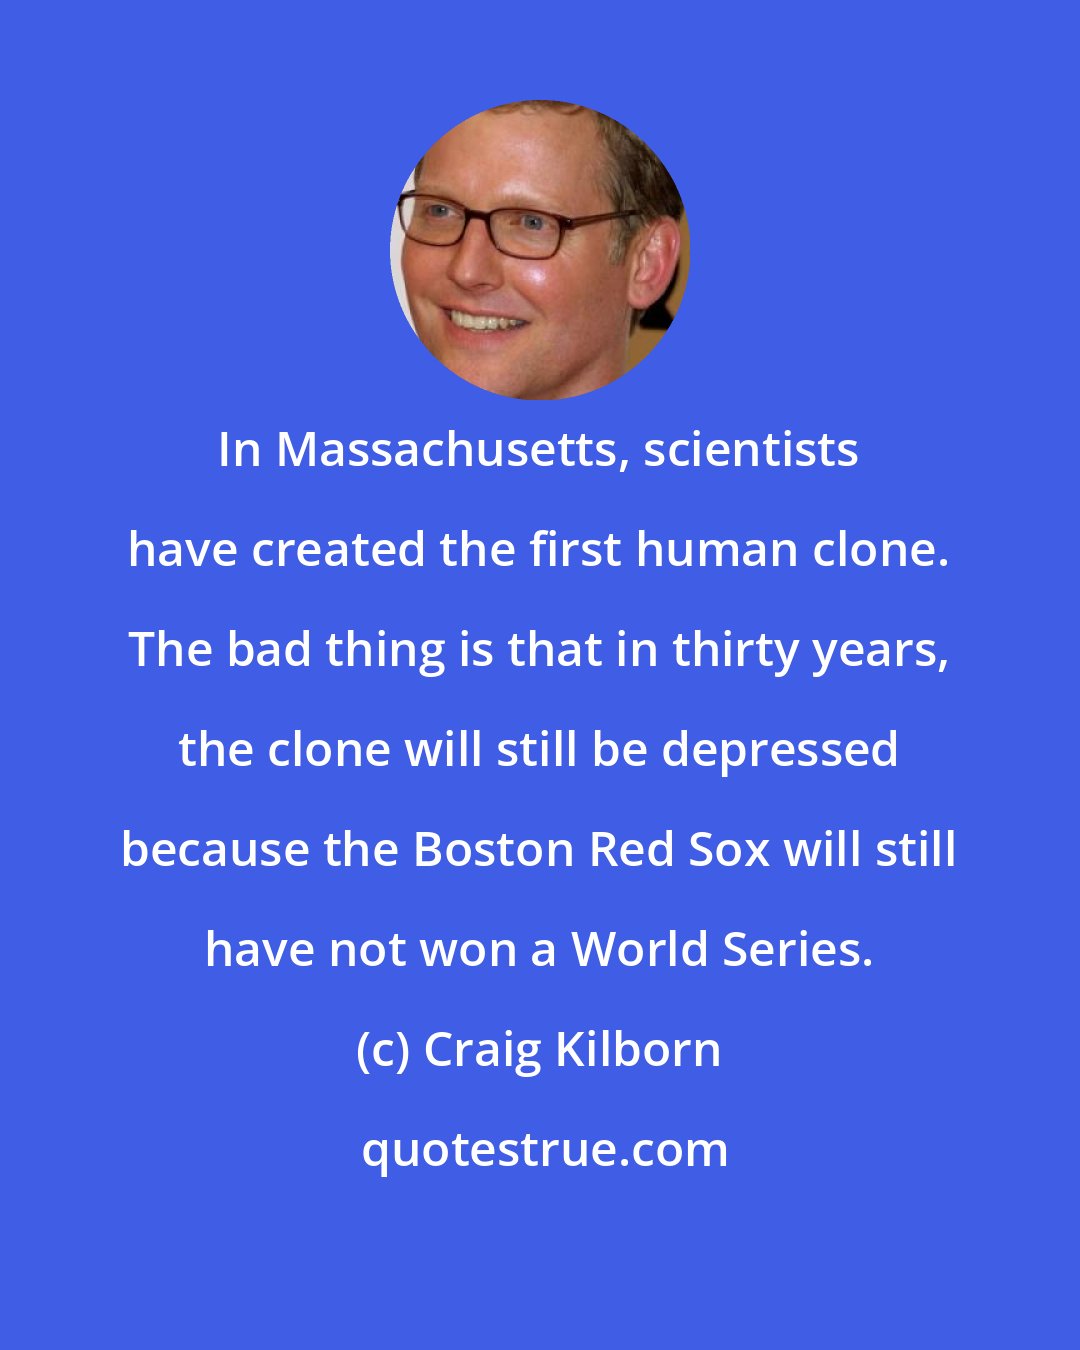 Craig Kilborn: In Massachusetts, scientists have created the first human clone. The bad thing is that in thirty years, the clone will still be depressed because the Boston Red Sox will still have not won a World Series.